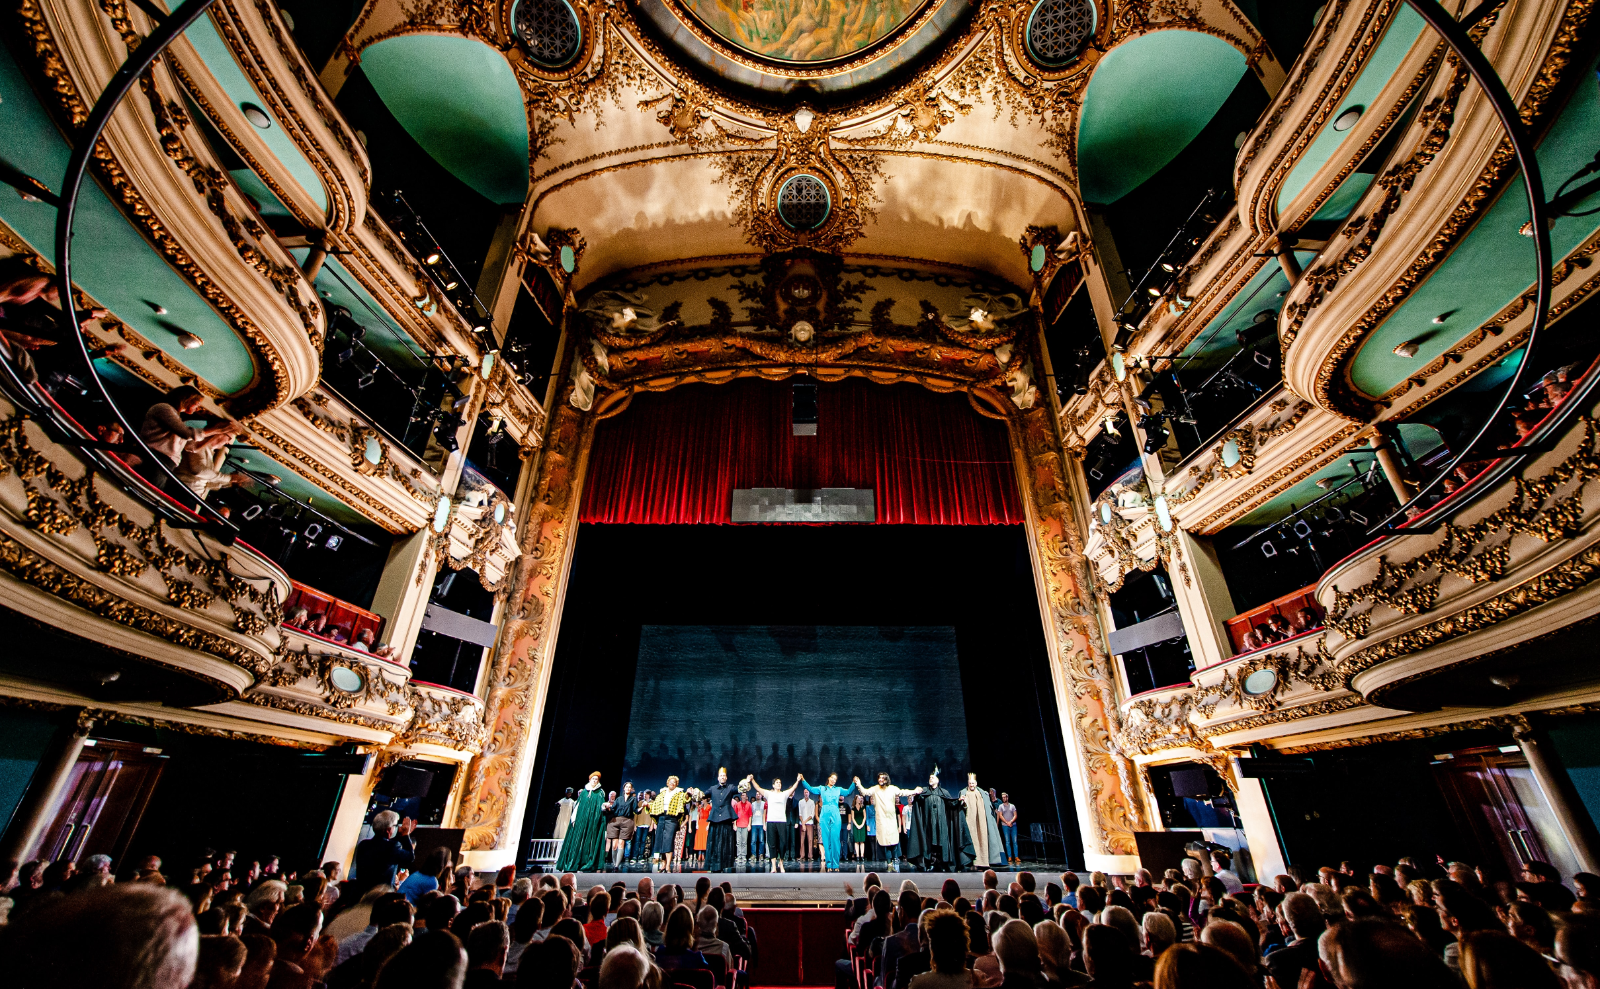 baroque theater with metallic gold balconies and a full audience sitting in red velvet chairs, on the stage is a cast holding hands to take a curtain call